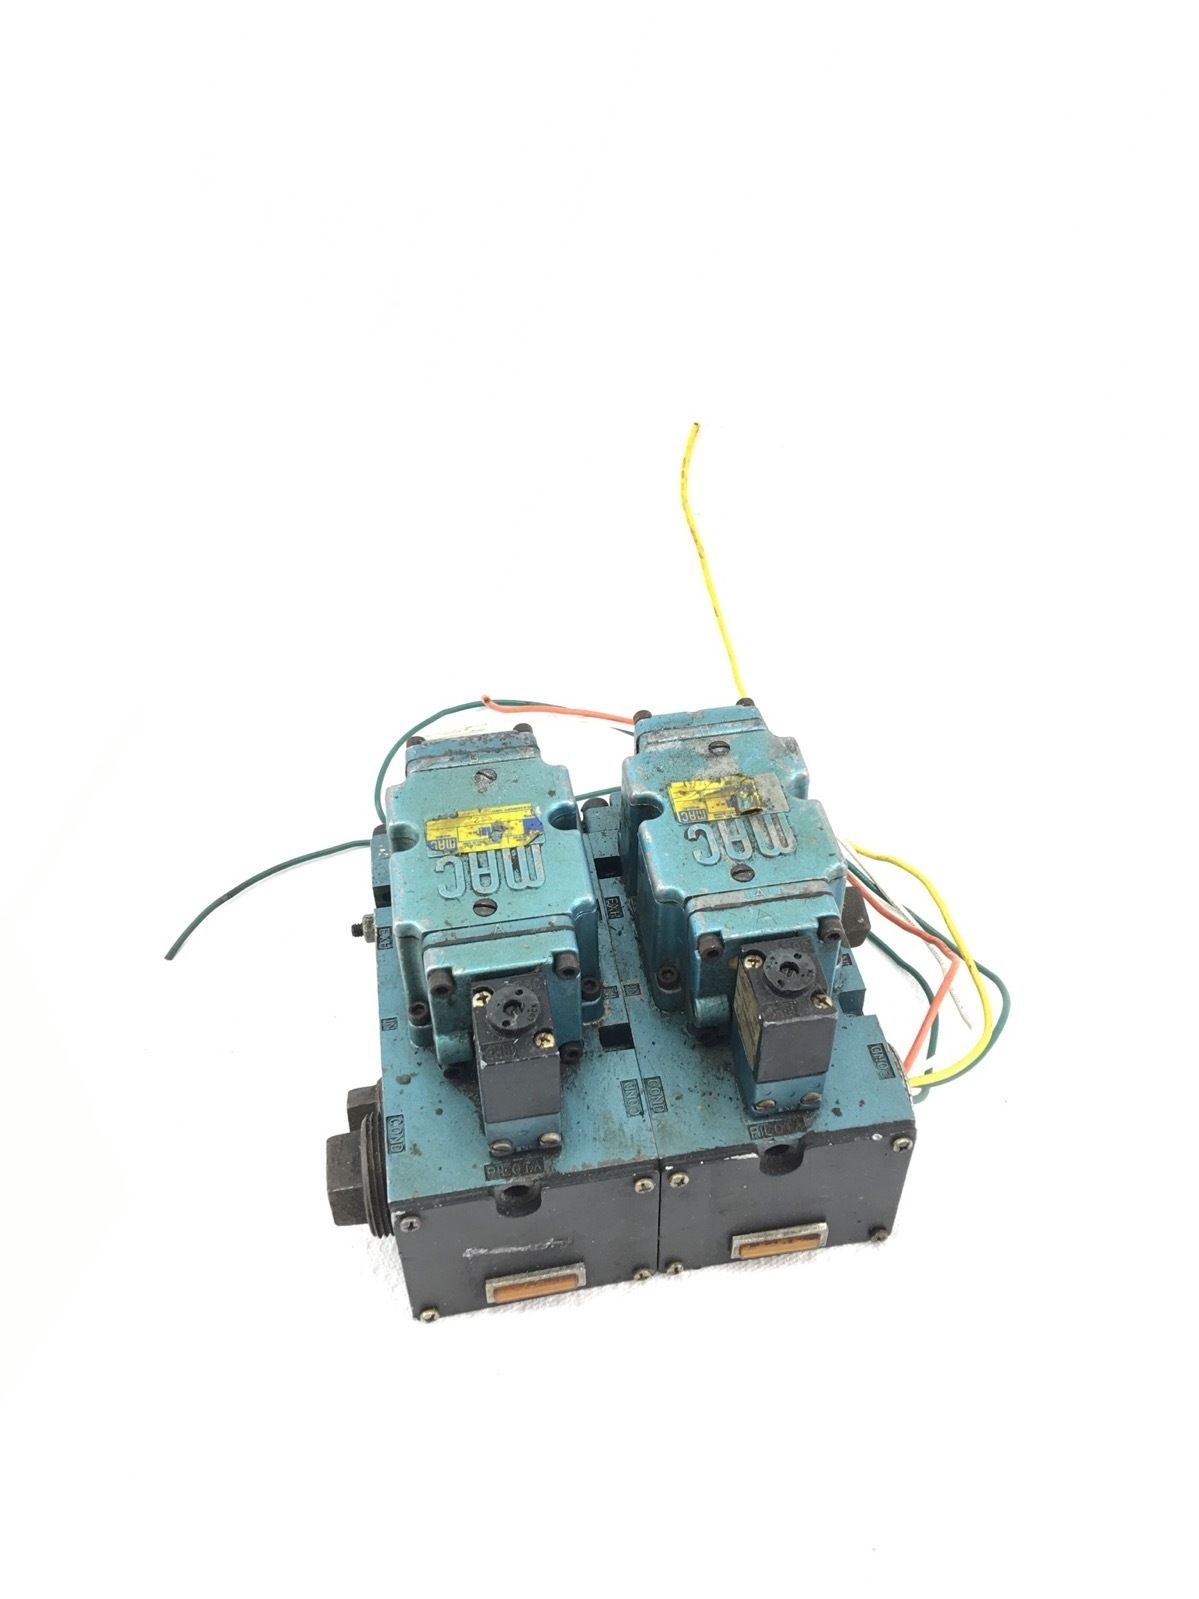 USED MAC BASE WITH (2) MAC SOLENOID VALVES ATTACHED, FAST SHIPPING! (B387) 1